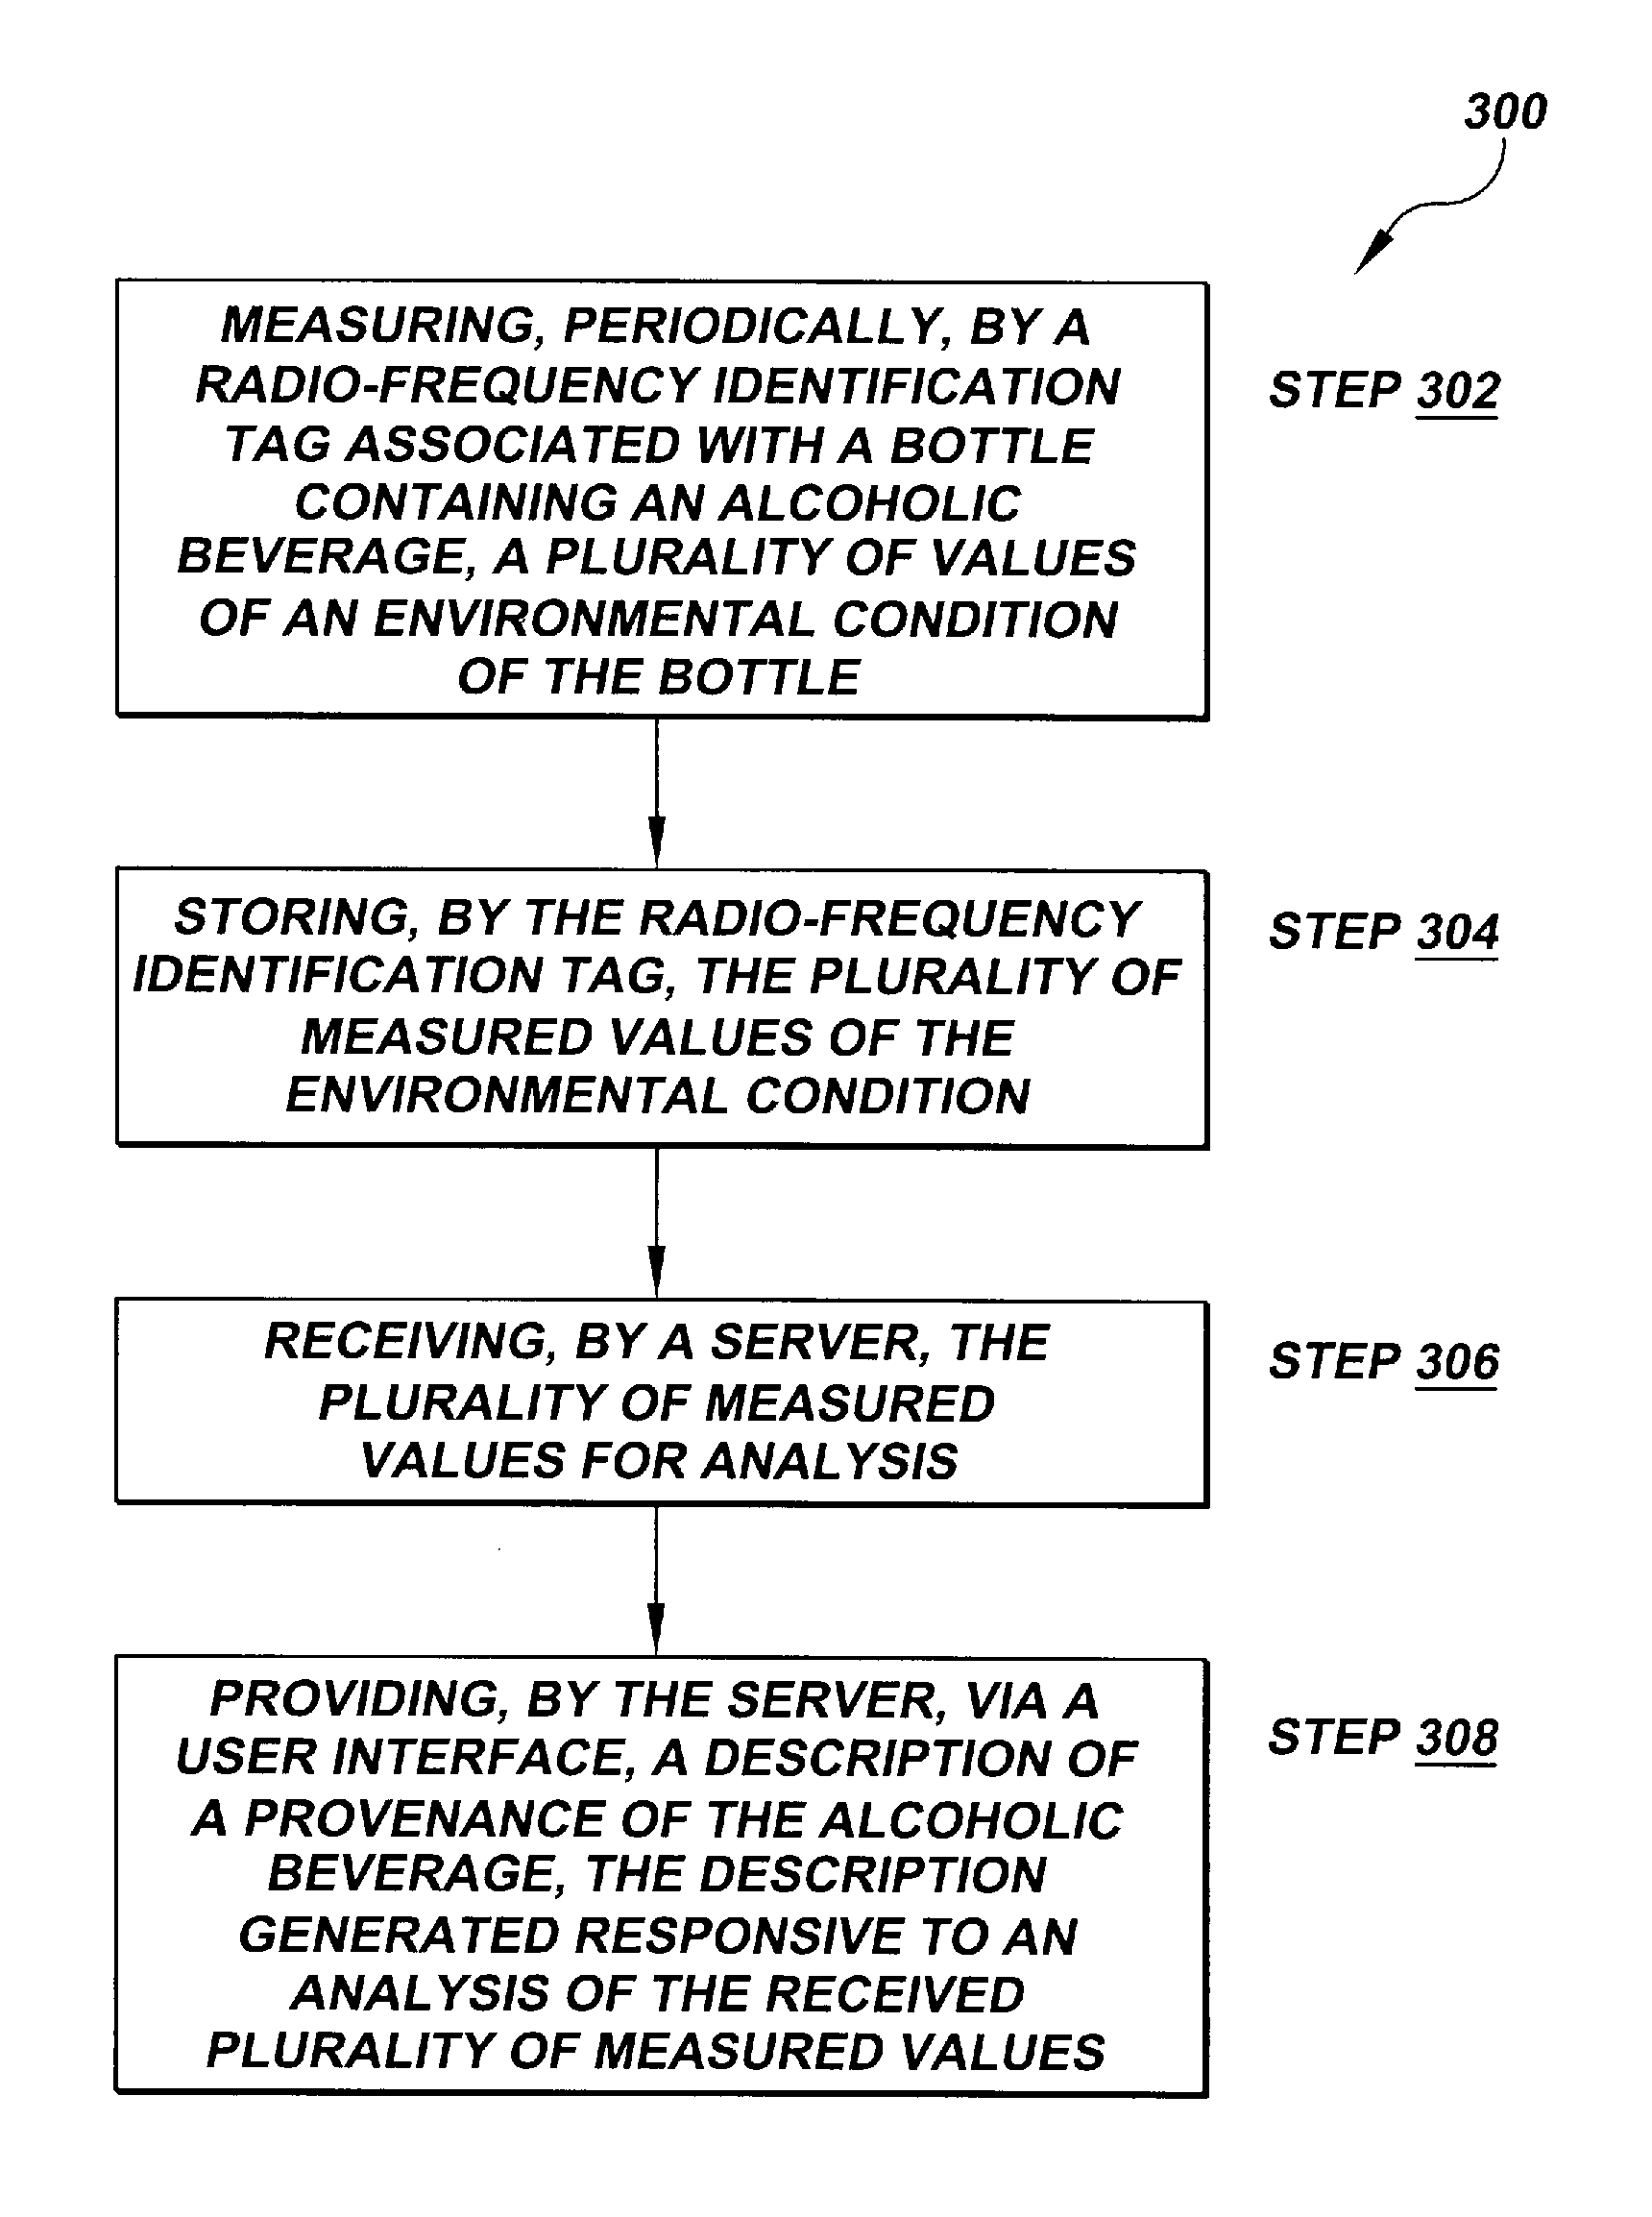 Methods and systems for certifying provenance of alcoholic beverages